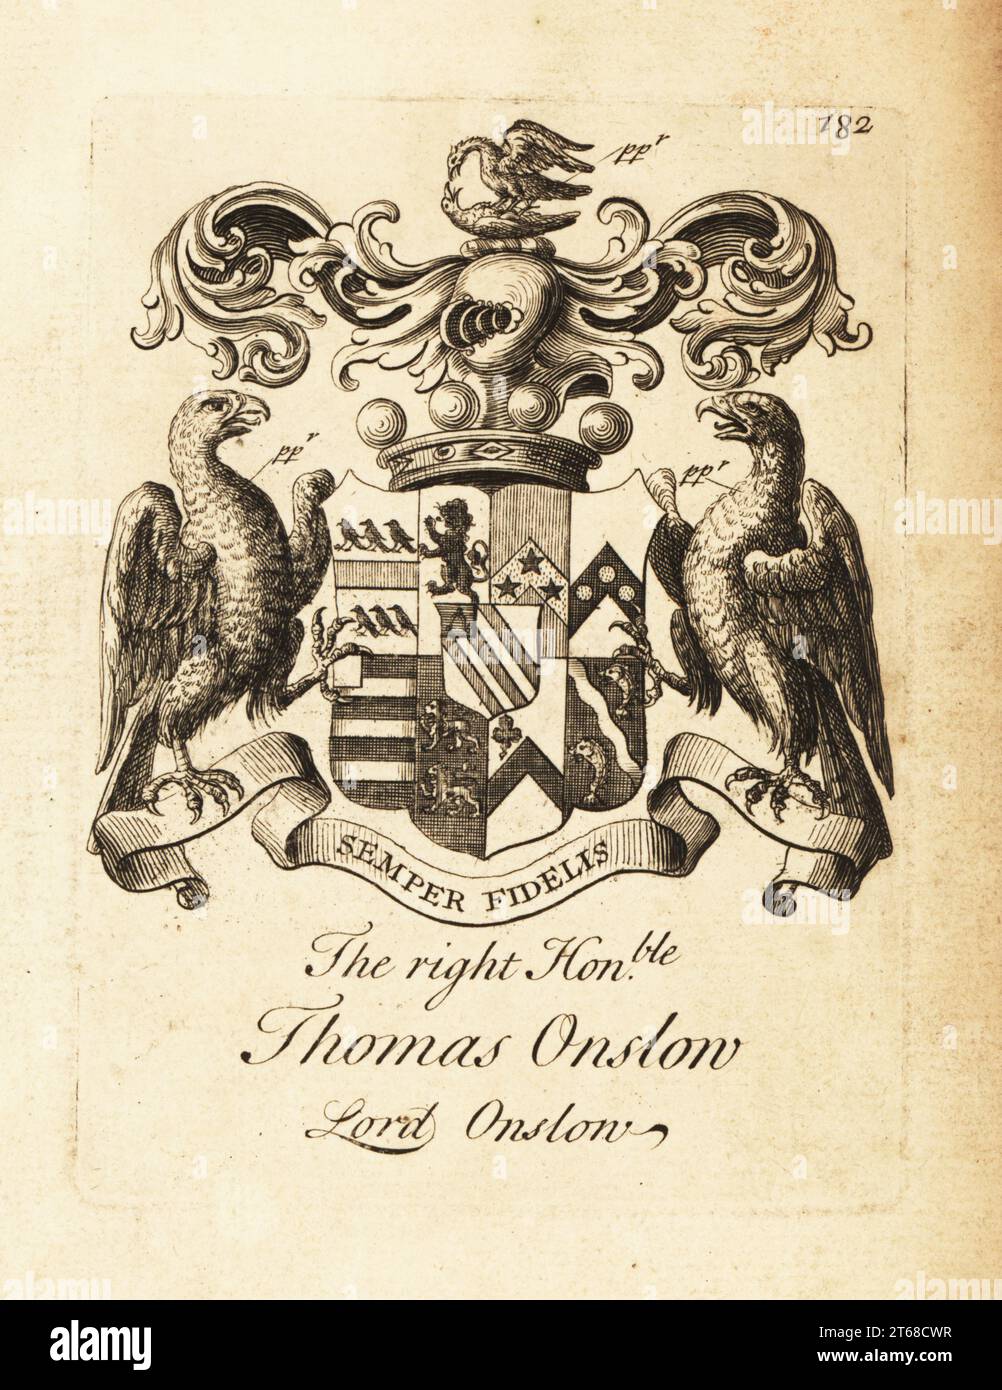 Coat of arms of the Right Honourable Thomas Onslow, Lord Onslow, 2nd Baron Onslow, 1679-1740. Copperplate engraving by Andrew Johnston after C. Gardiner from Notitia Anglicana, Shewing the Achievements of all the English Nobility, Andrew Johnson, the Strand, London, 1724. Stock Photo